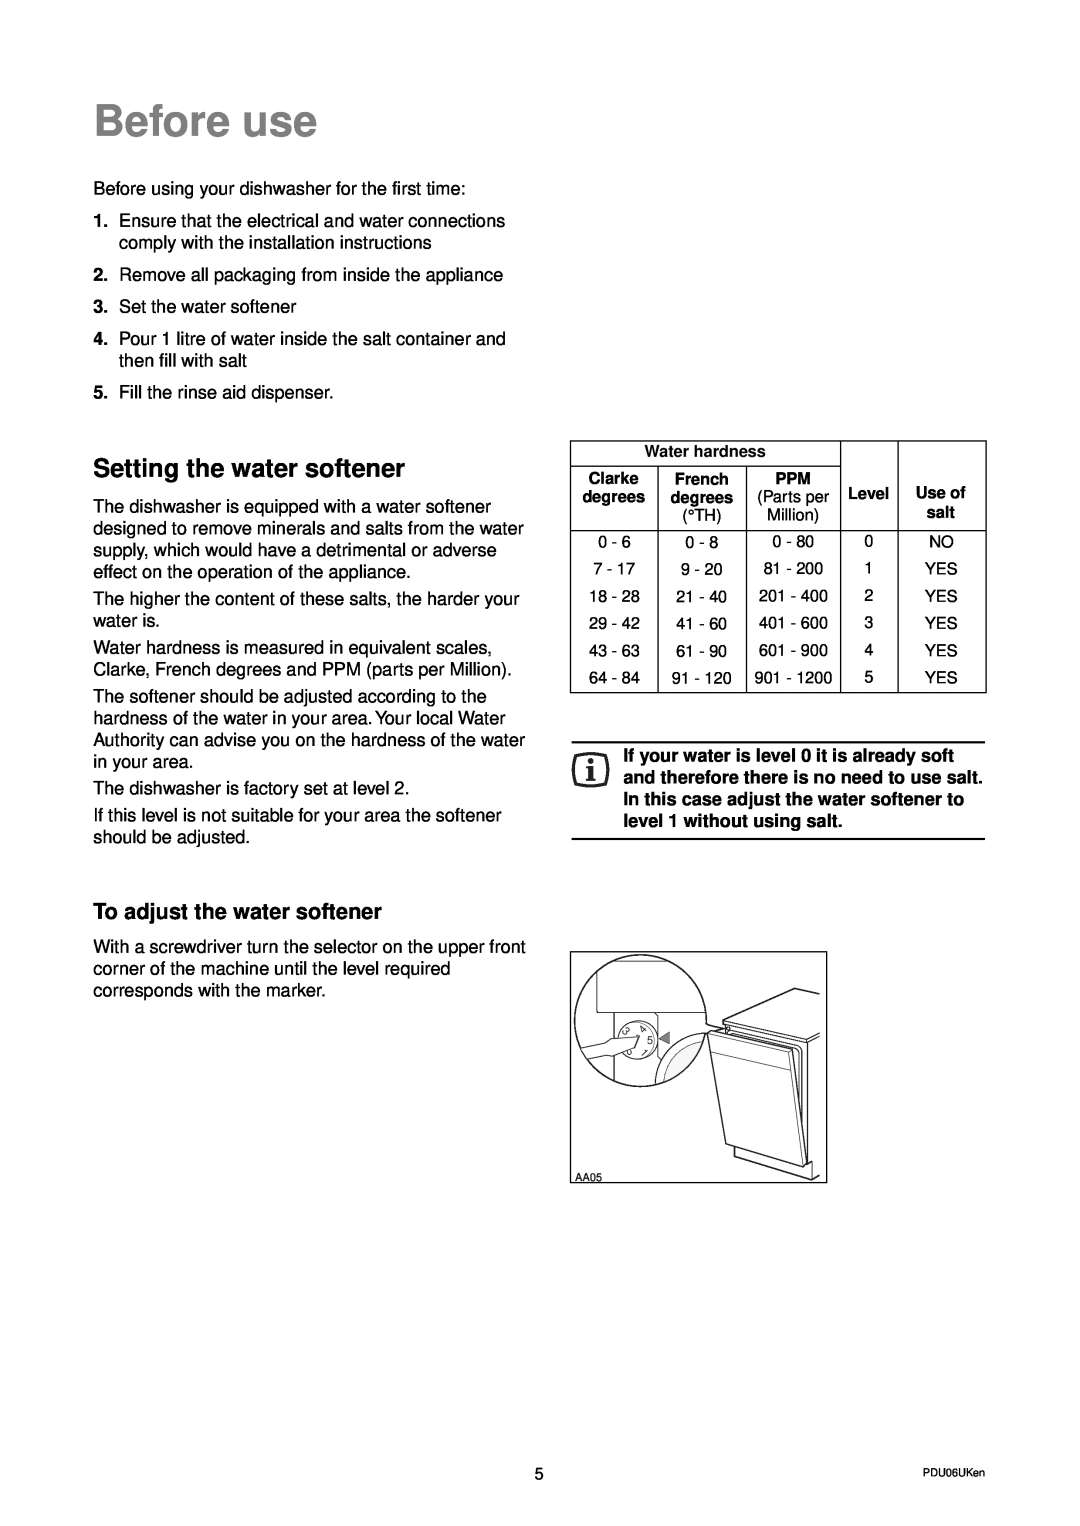 Zanussi ZD 684 manual Before use, Setting the water softener, To adjust the water softener 